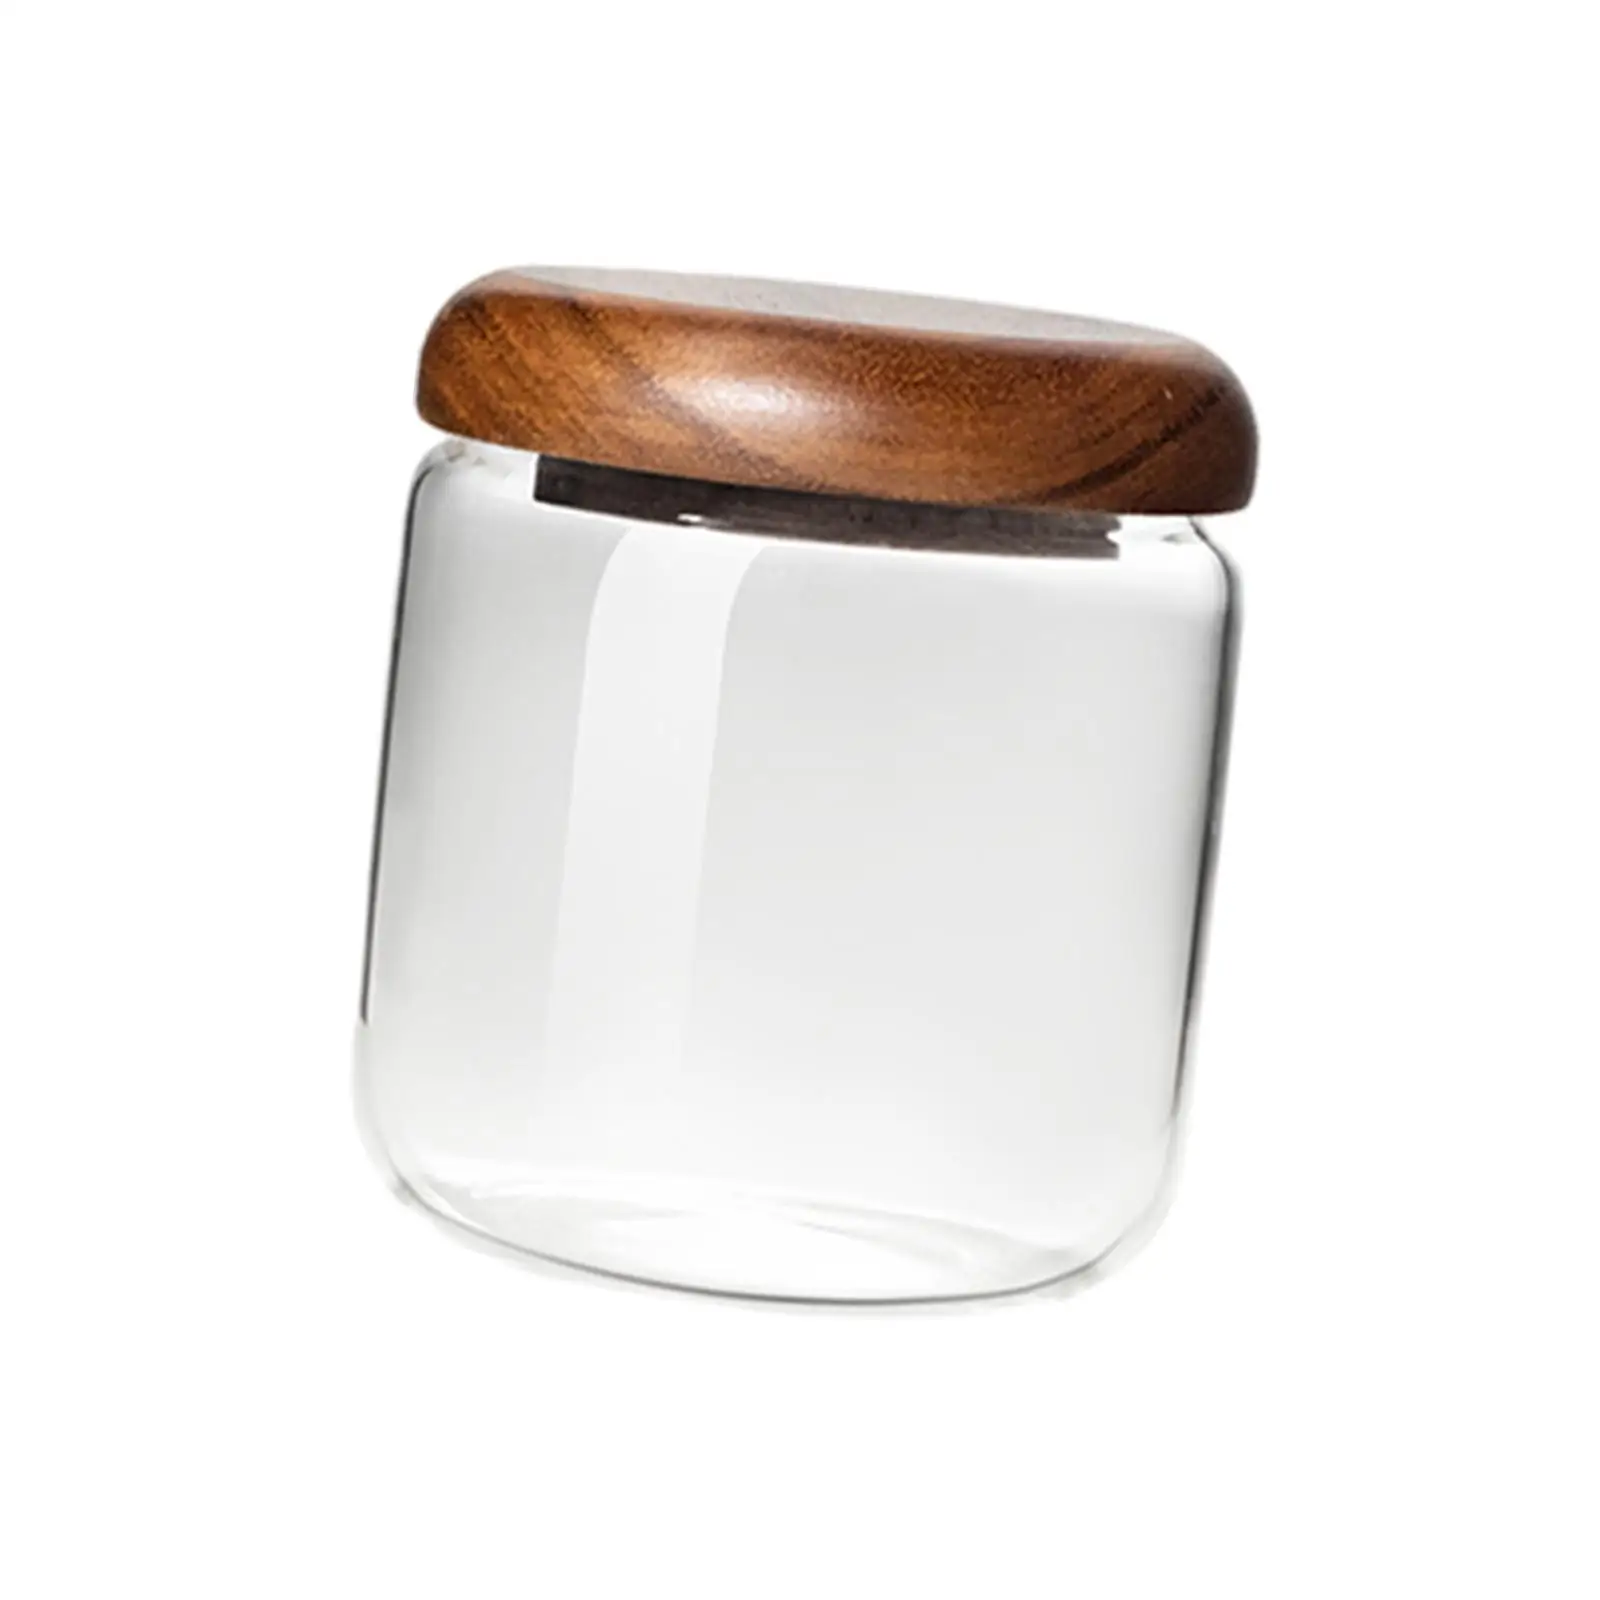 Glass Storage Jar with Wood Lid Reusable Counter Top Organizer Kitchen Canister for Candy Tea Spices Dry Goods Coffee Beans